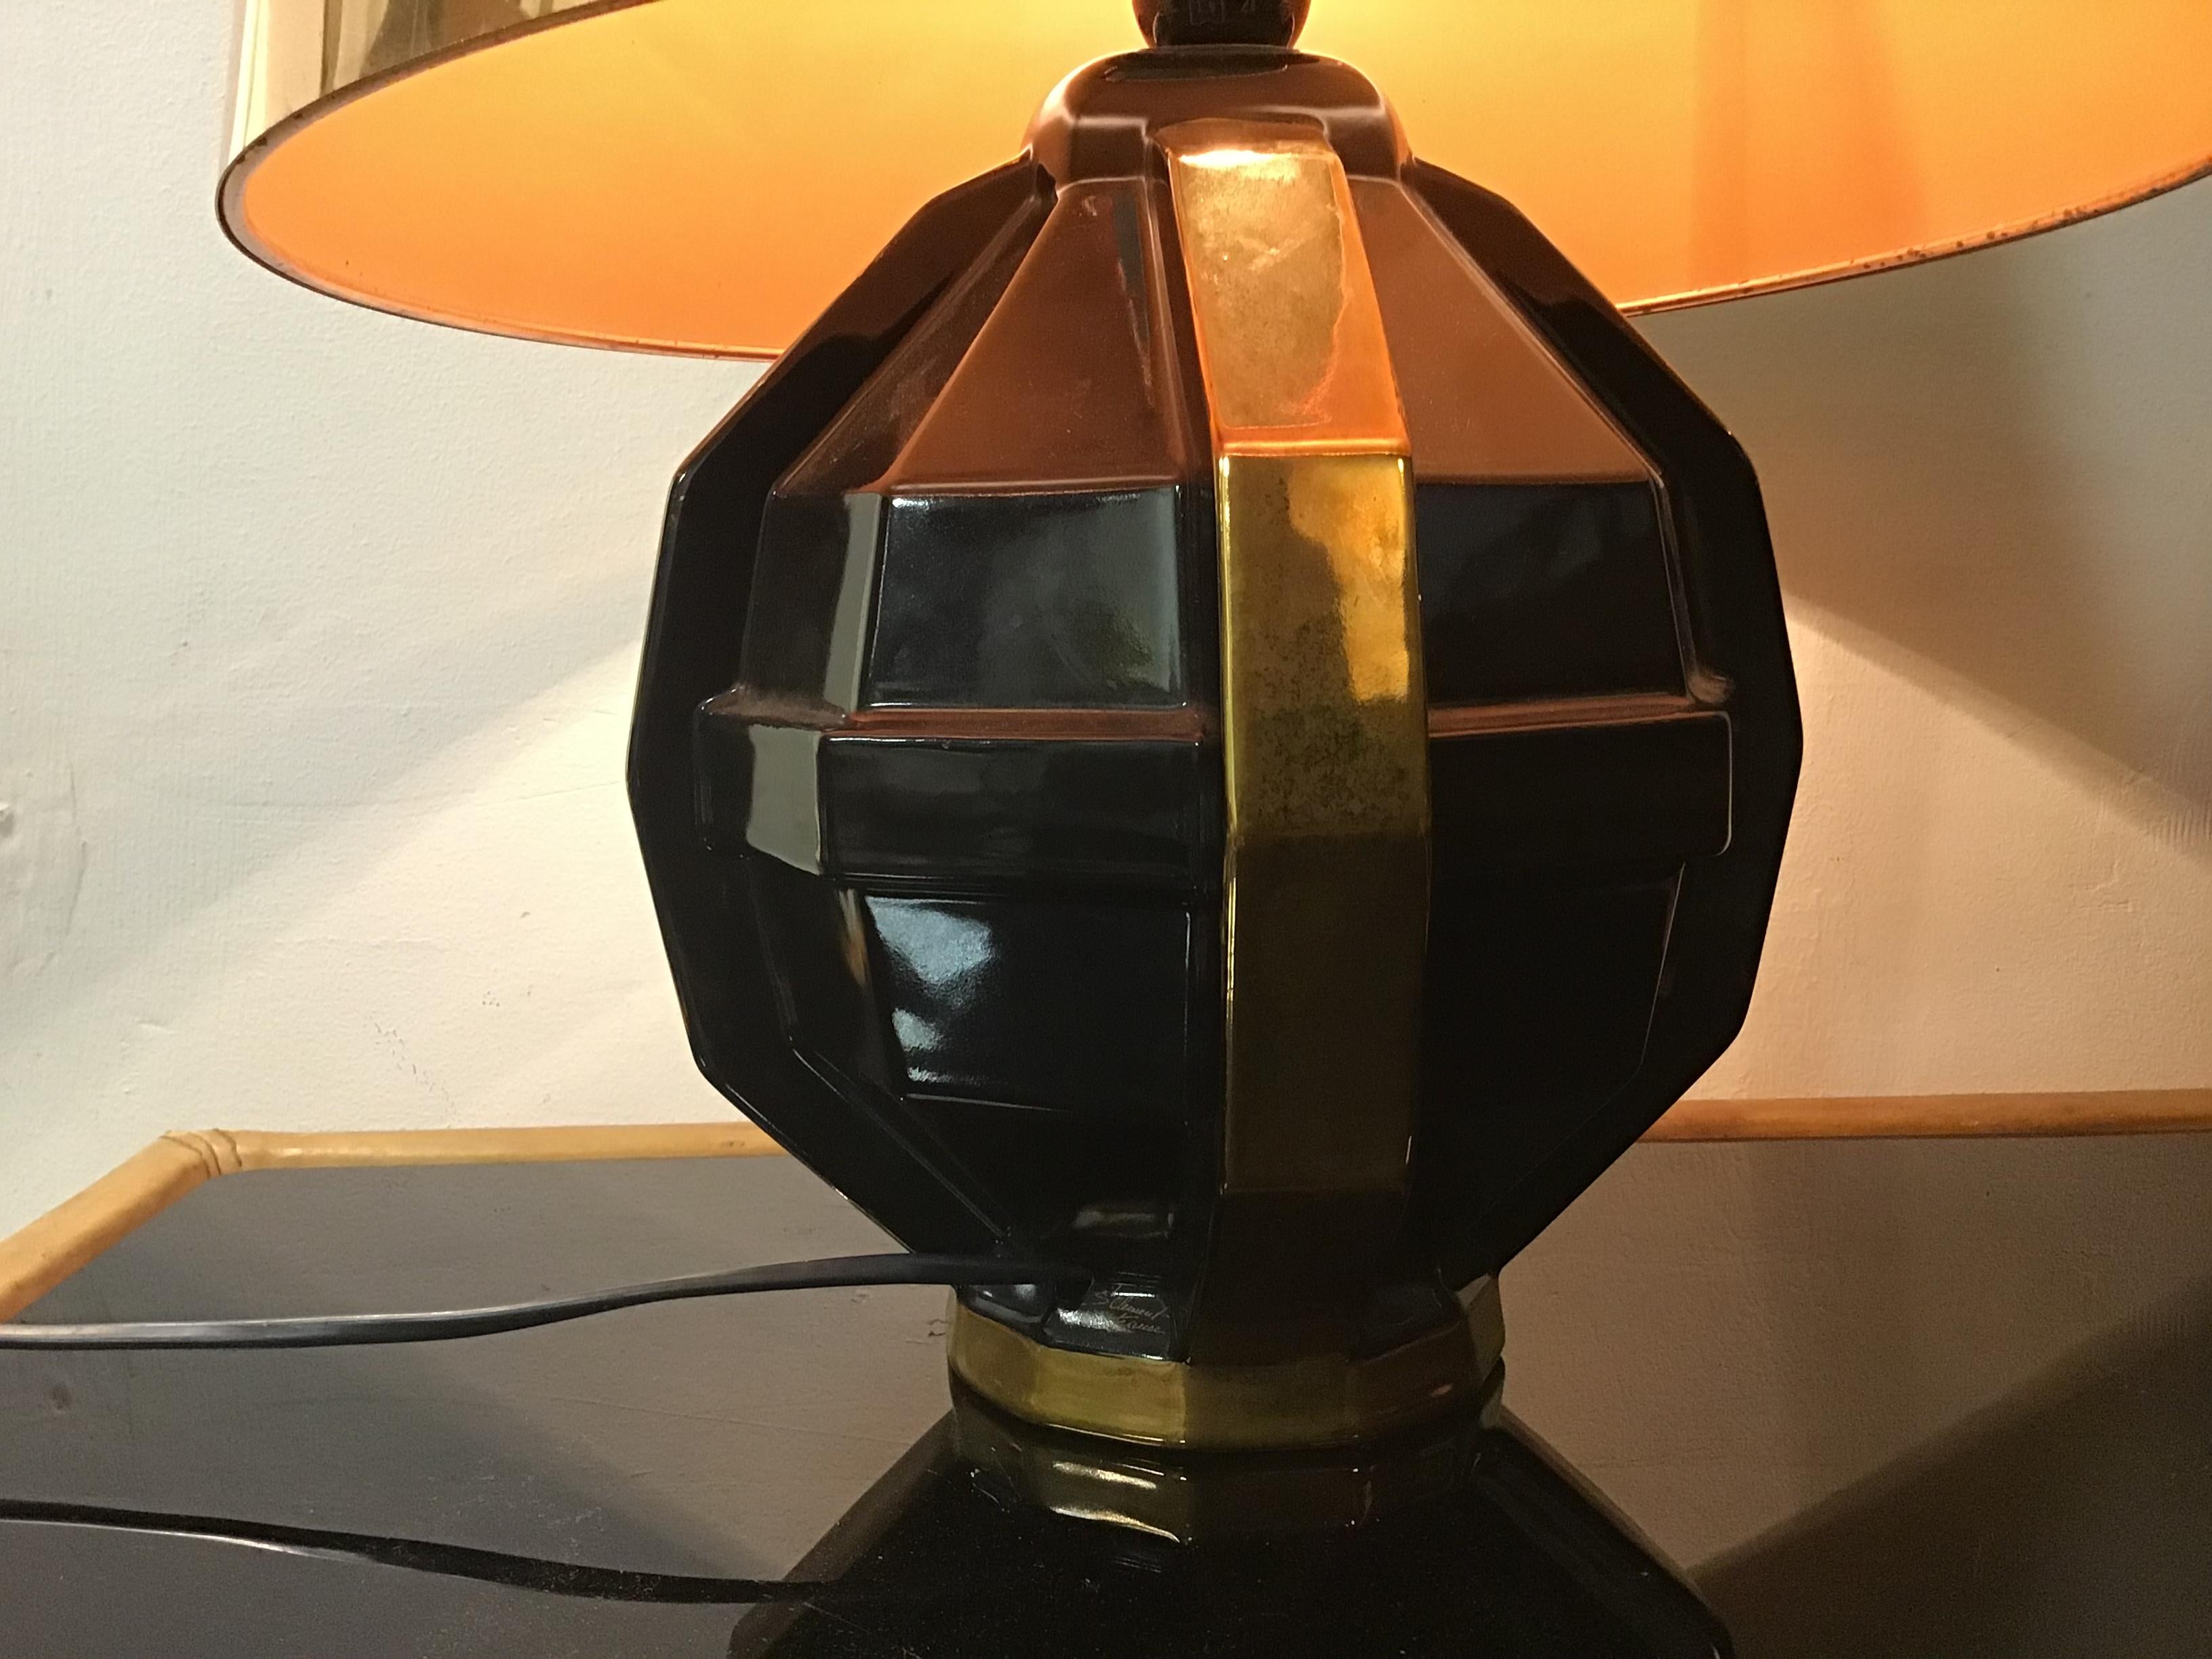 Ceramic based table lamp in colored in black and copper
Signed St Clement, circa 1930s, French.